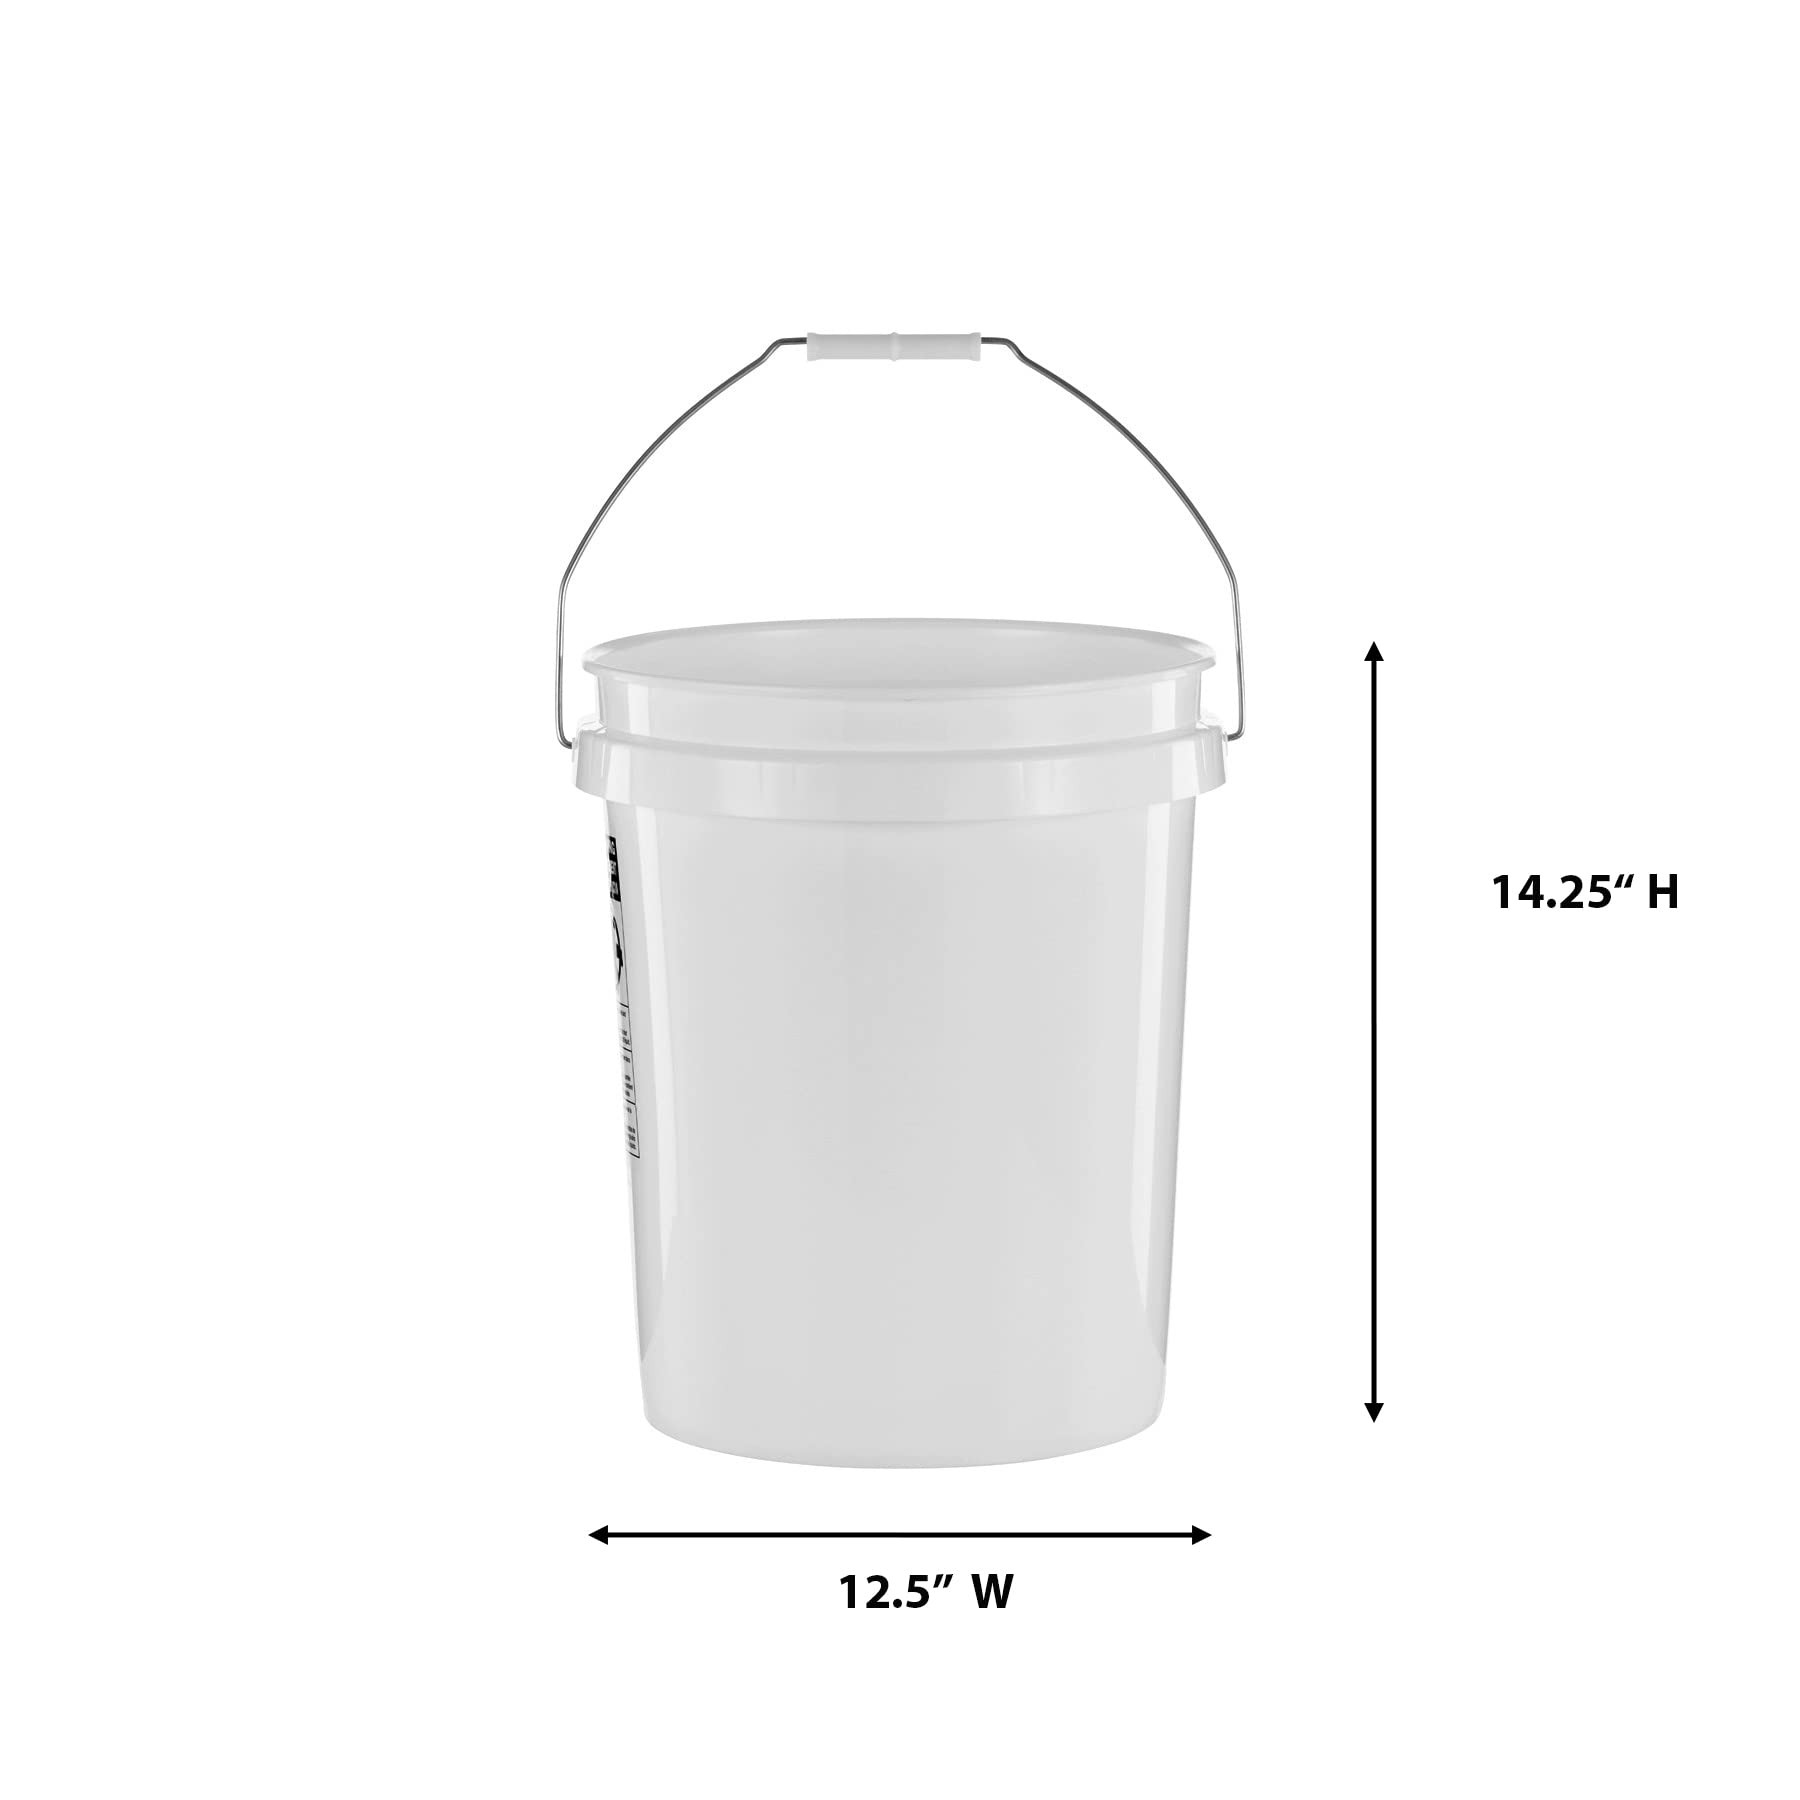 United Solutions 5 Gallon Bucket, Heavy Duty Plastic Bucket, Comfortable Handle, Easy to Clean, Perfect for on The Job, Home Improvement, or Household Cleaning; White, Pack of 3